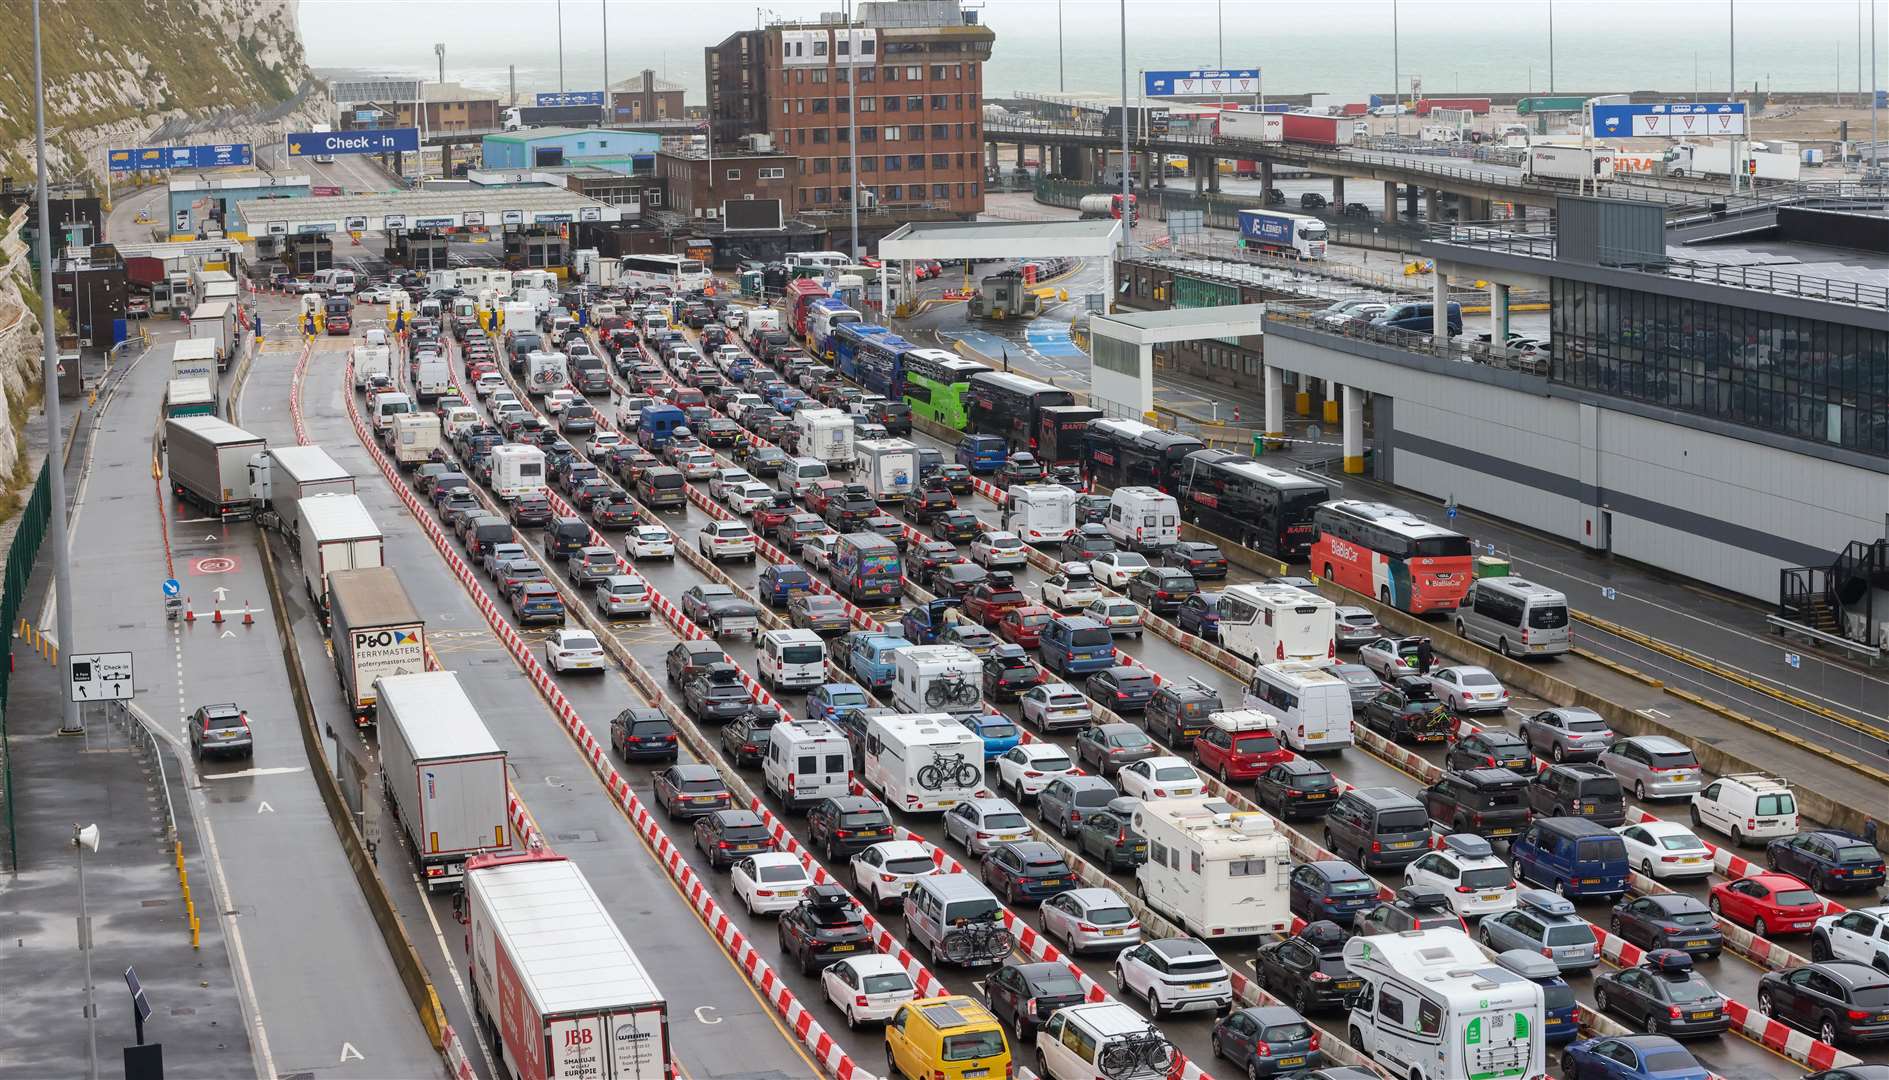 Traffic can also build up at the Port of Dover itself. Picture: UKNIP